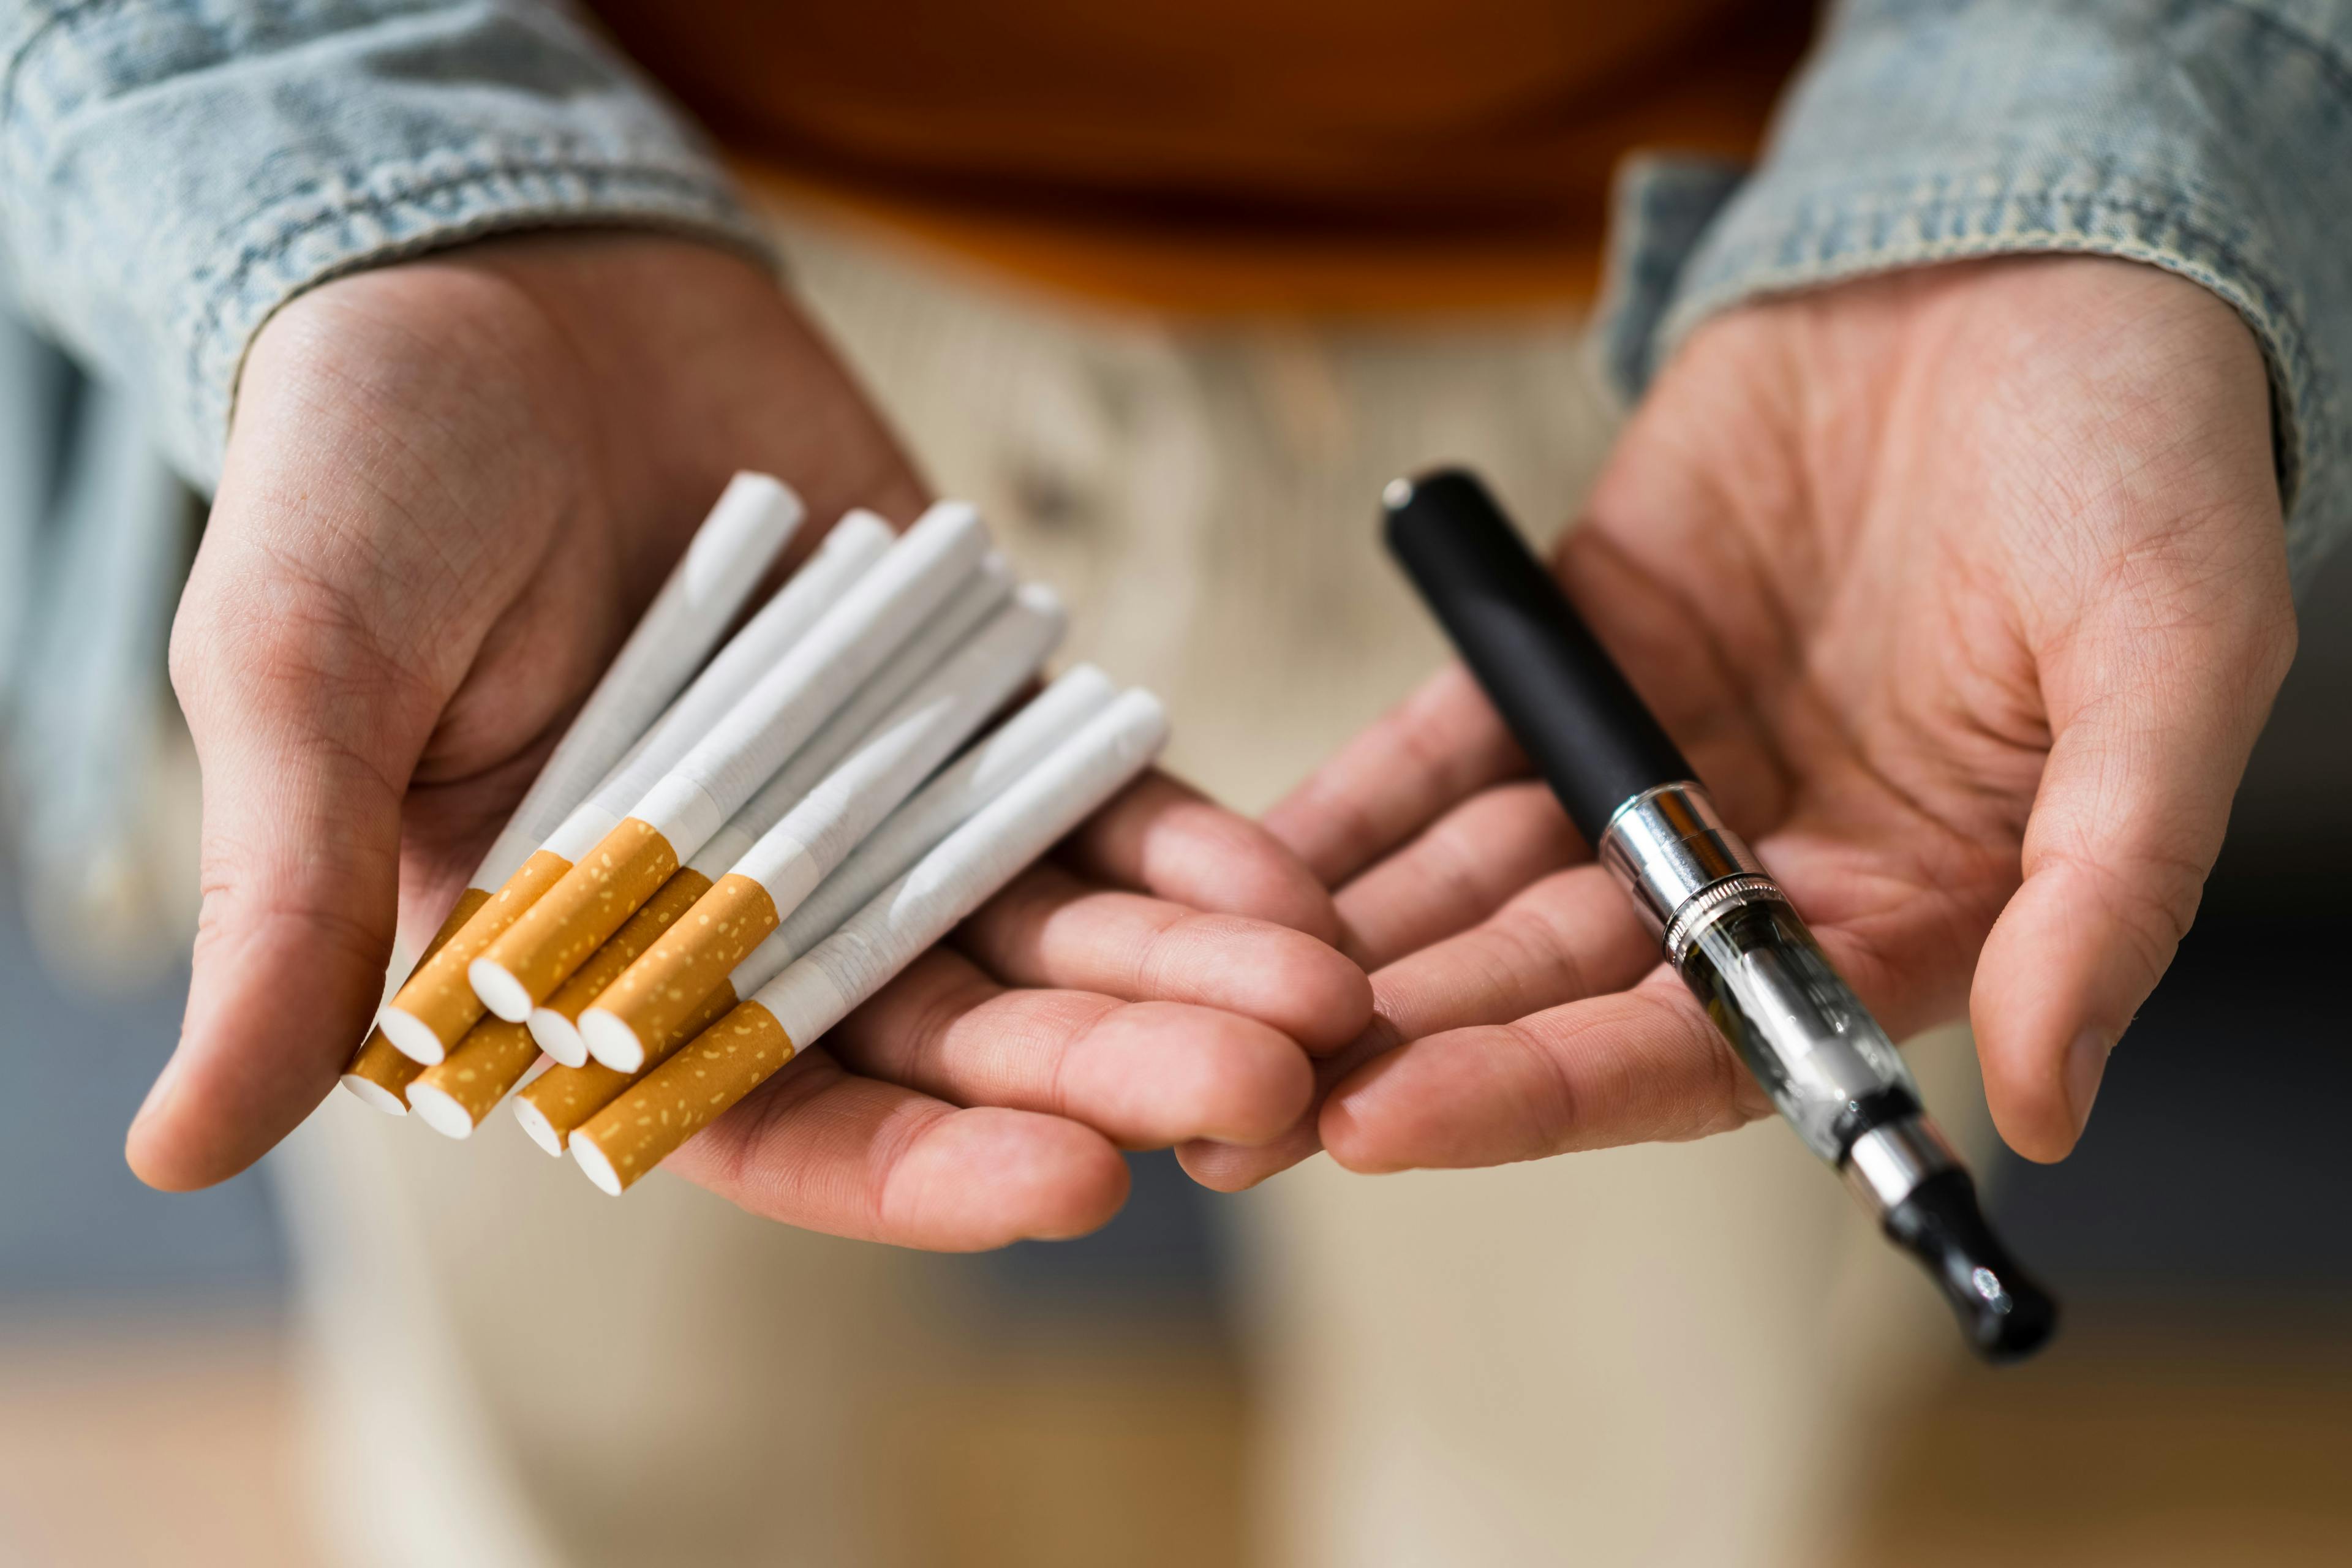 E-cigarettes can help patients stop smoking: ©Andrey Popov - stock.adobe.com